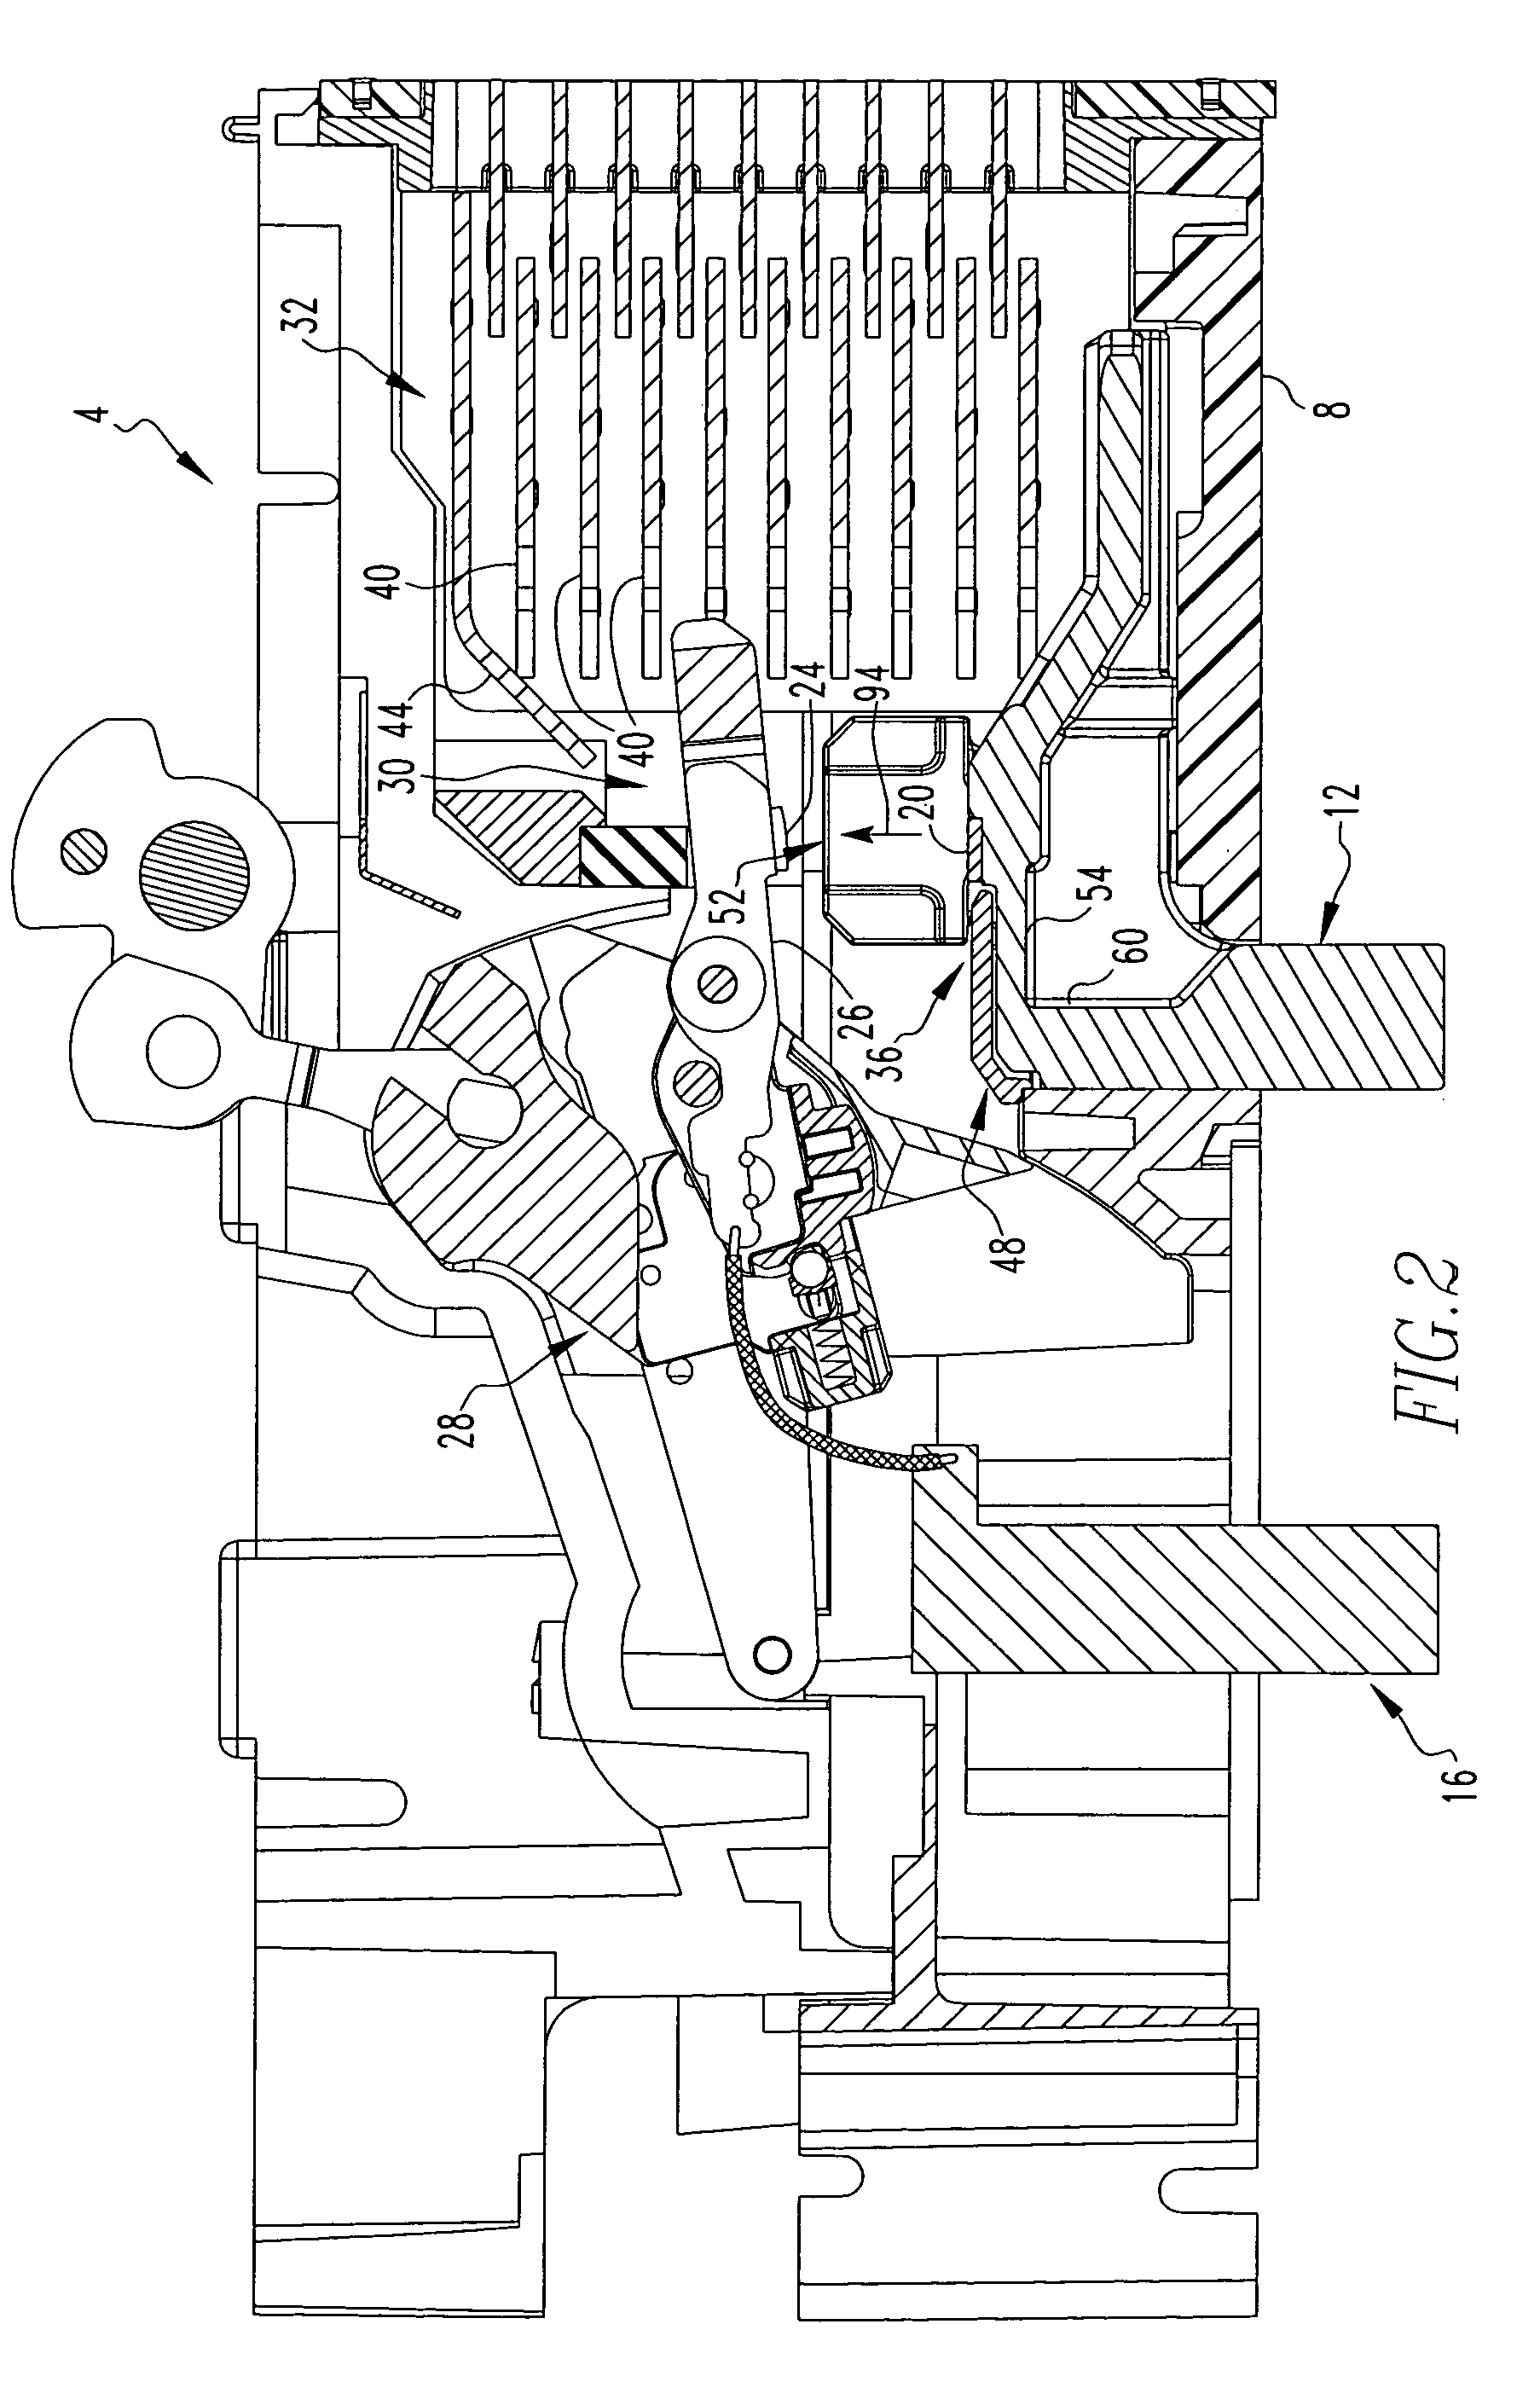 Circuit breaker with improved arc extinction system